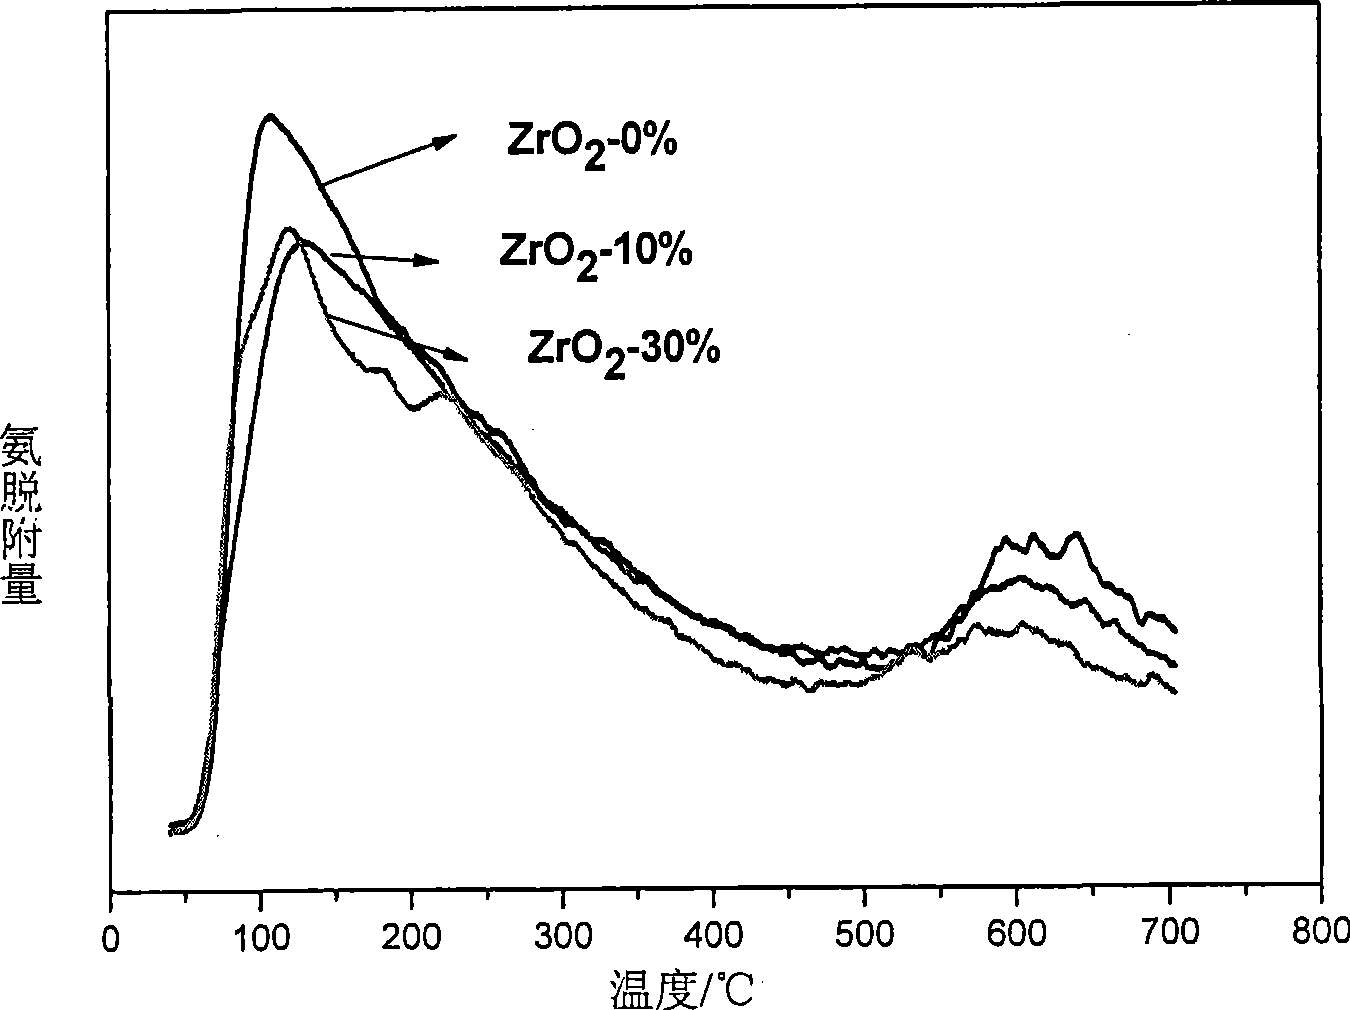 Aluminum-zirconium composite oxides carrier and supported hydrodesulphurization catalyst